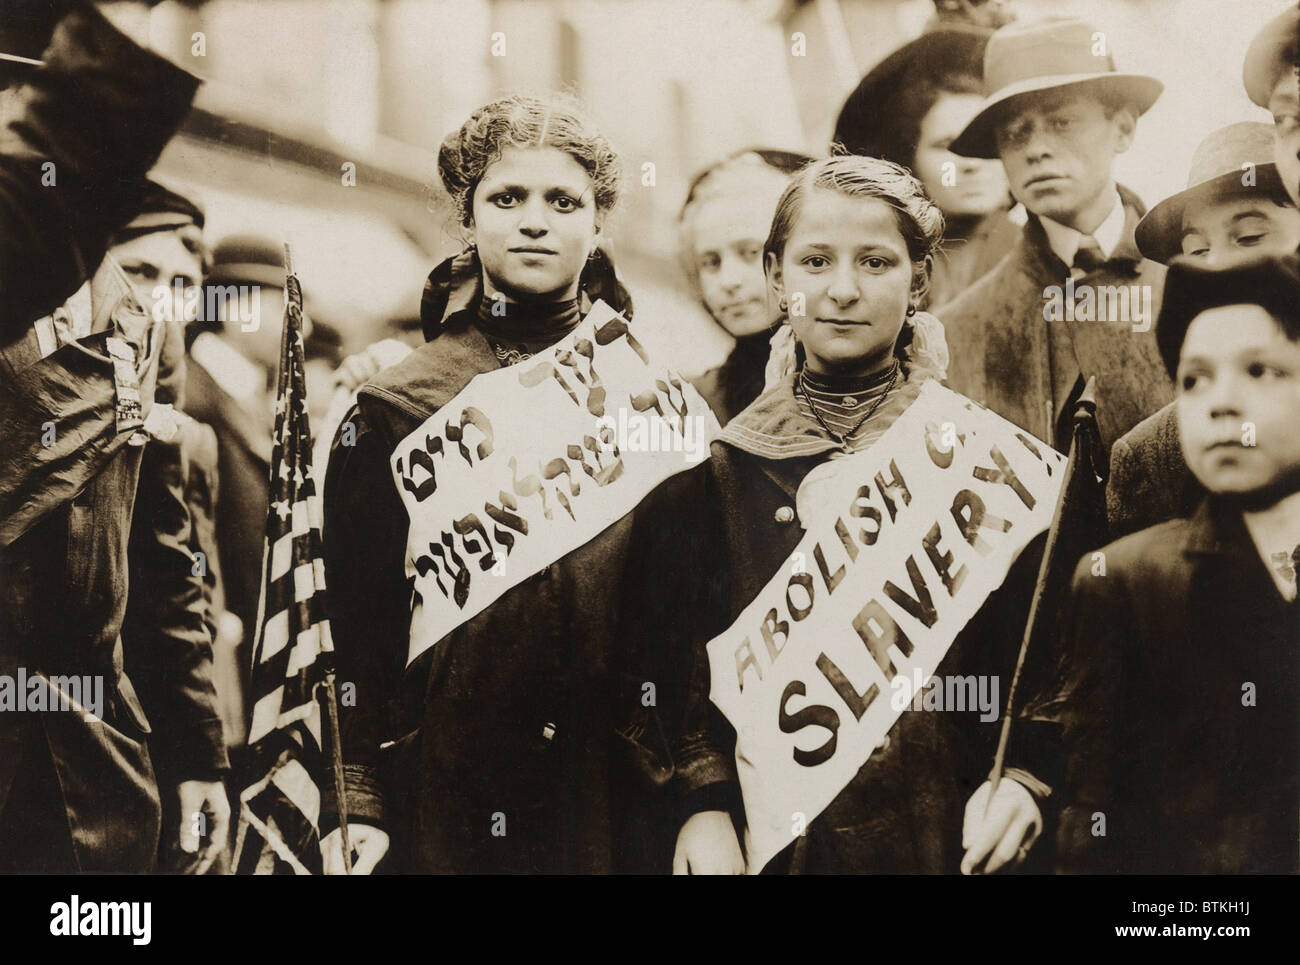 New York City May Day celebration of the international labor day. Two girls in the parade combined carrying an American flag, with wearing banners with the slogan ABOLISH CHILD SLAVERY!! In English and Yiddish. 1909. Stock Photo